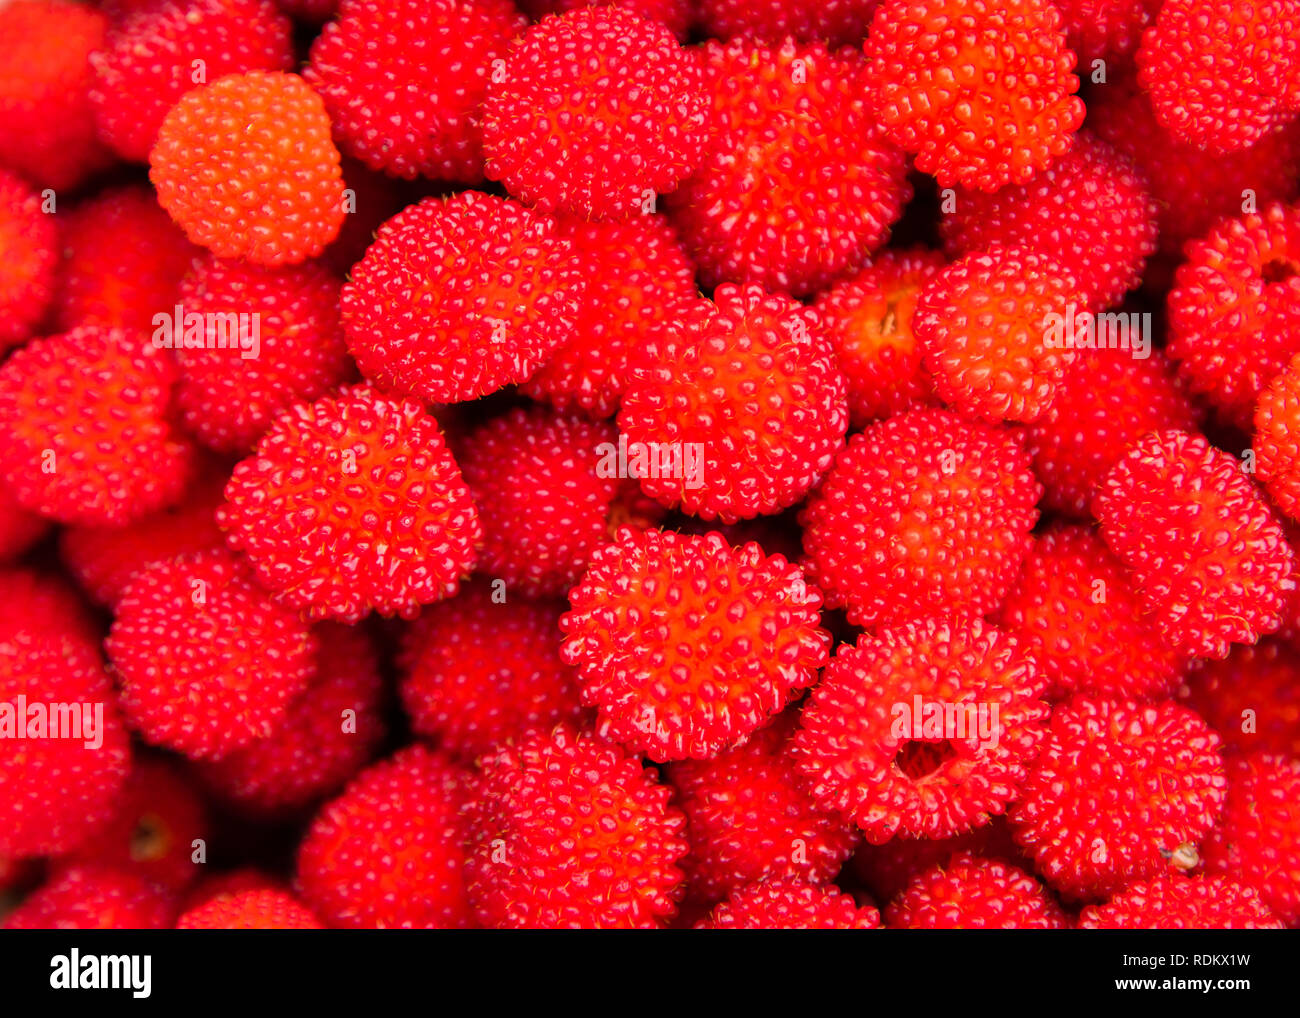 Rubus illecebrosus. Closeup of red balloon berry or strawberry raspberry is a red-fruited species of Rubus berries growing on spiky bushes. This type  Stock Photo